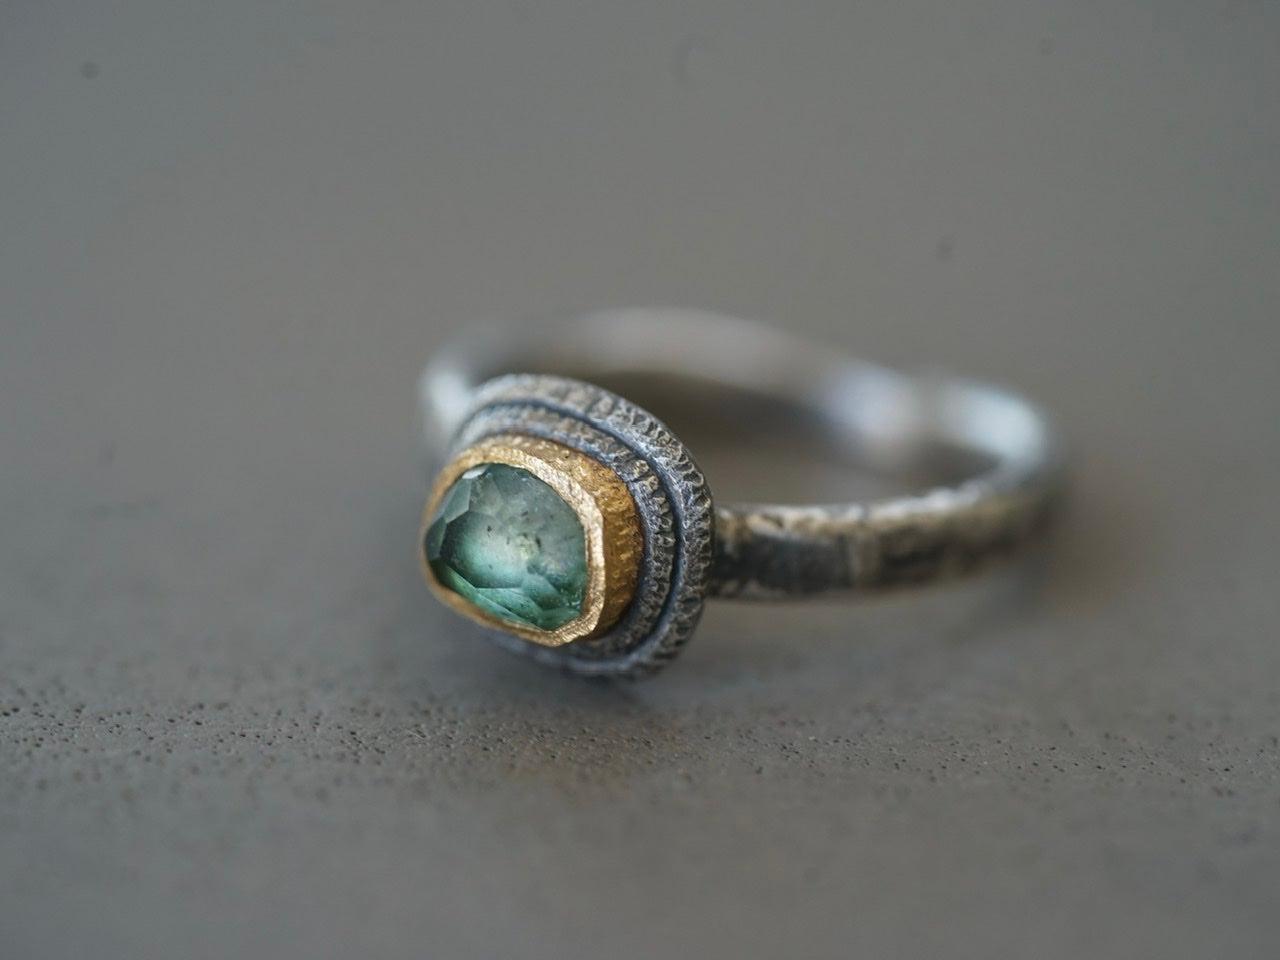 Tourmaline and 22k gold ring, size 6